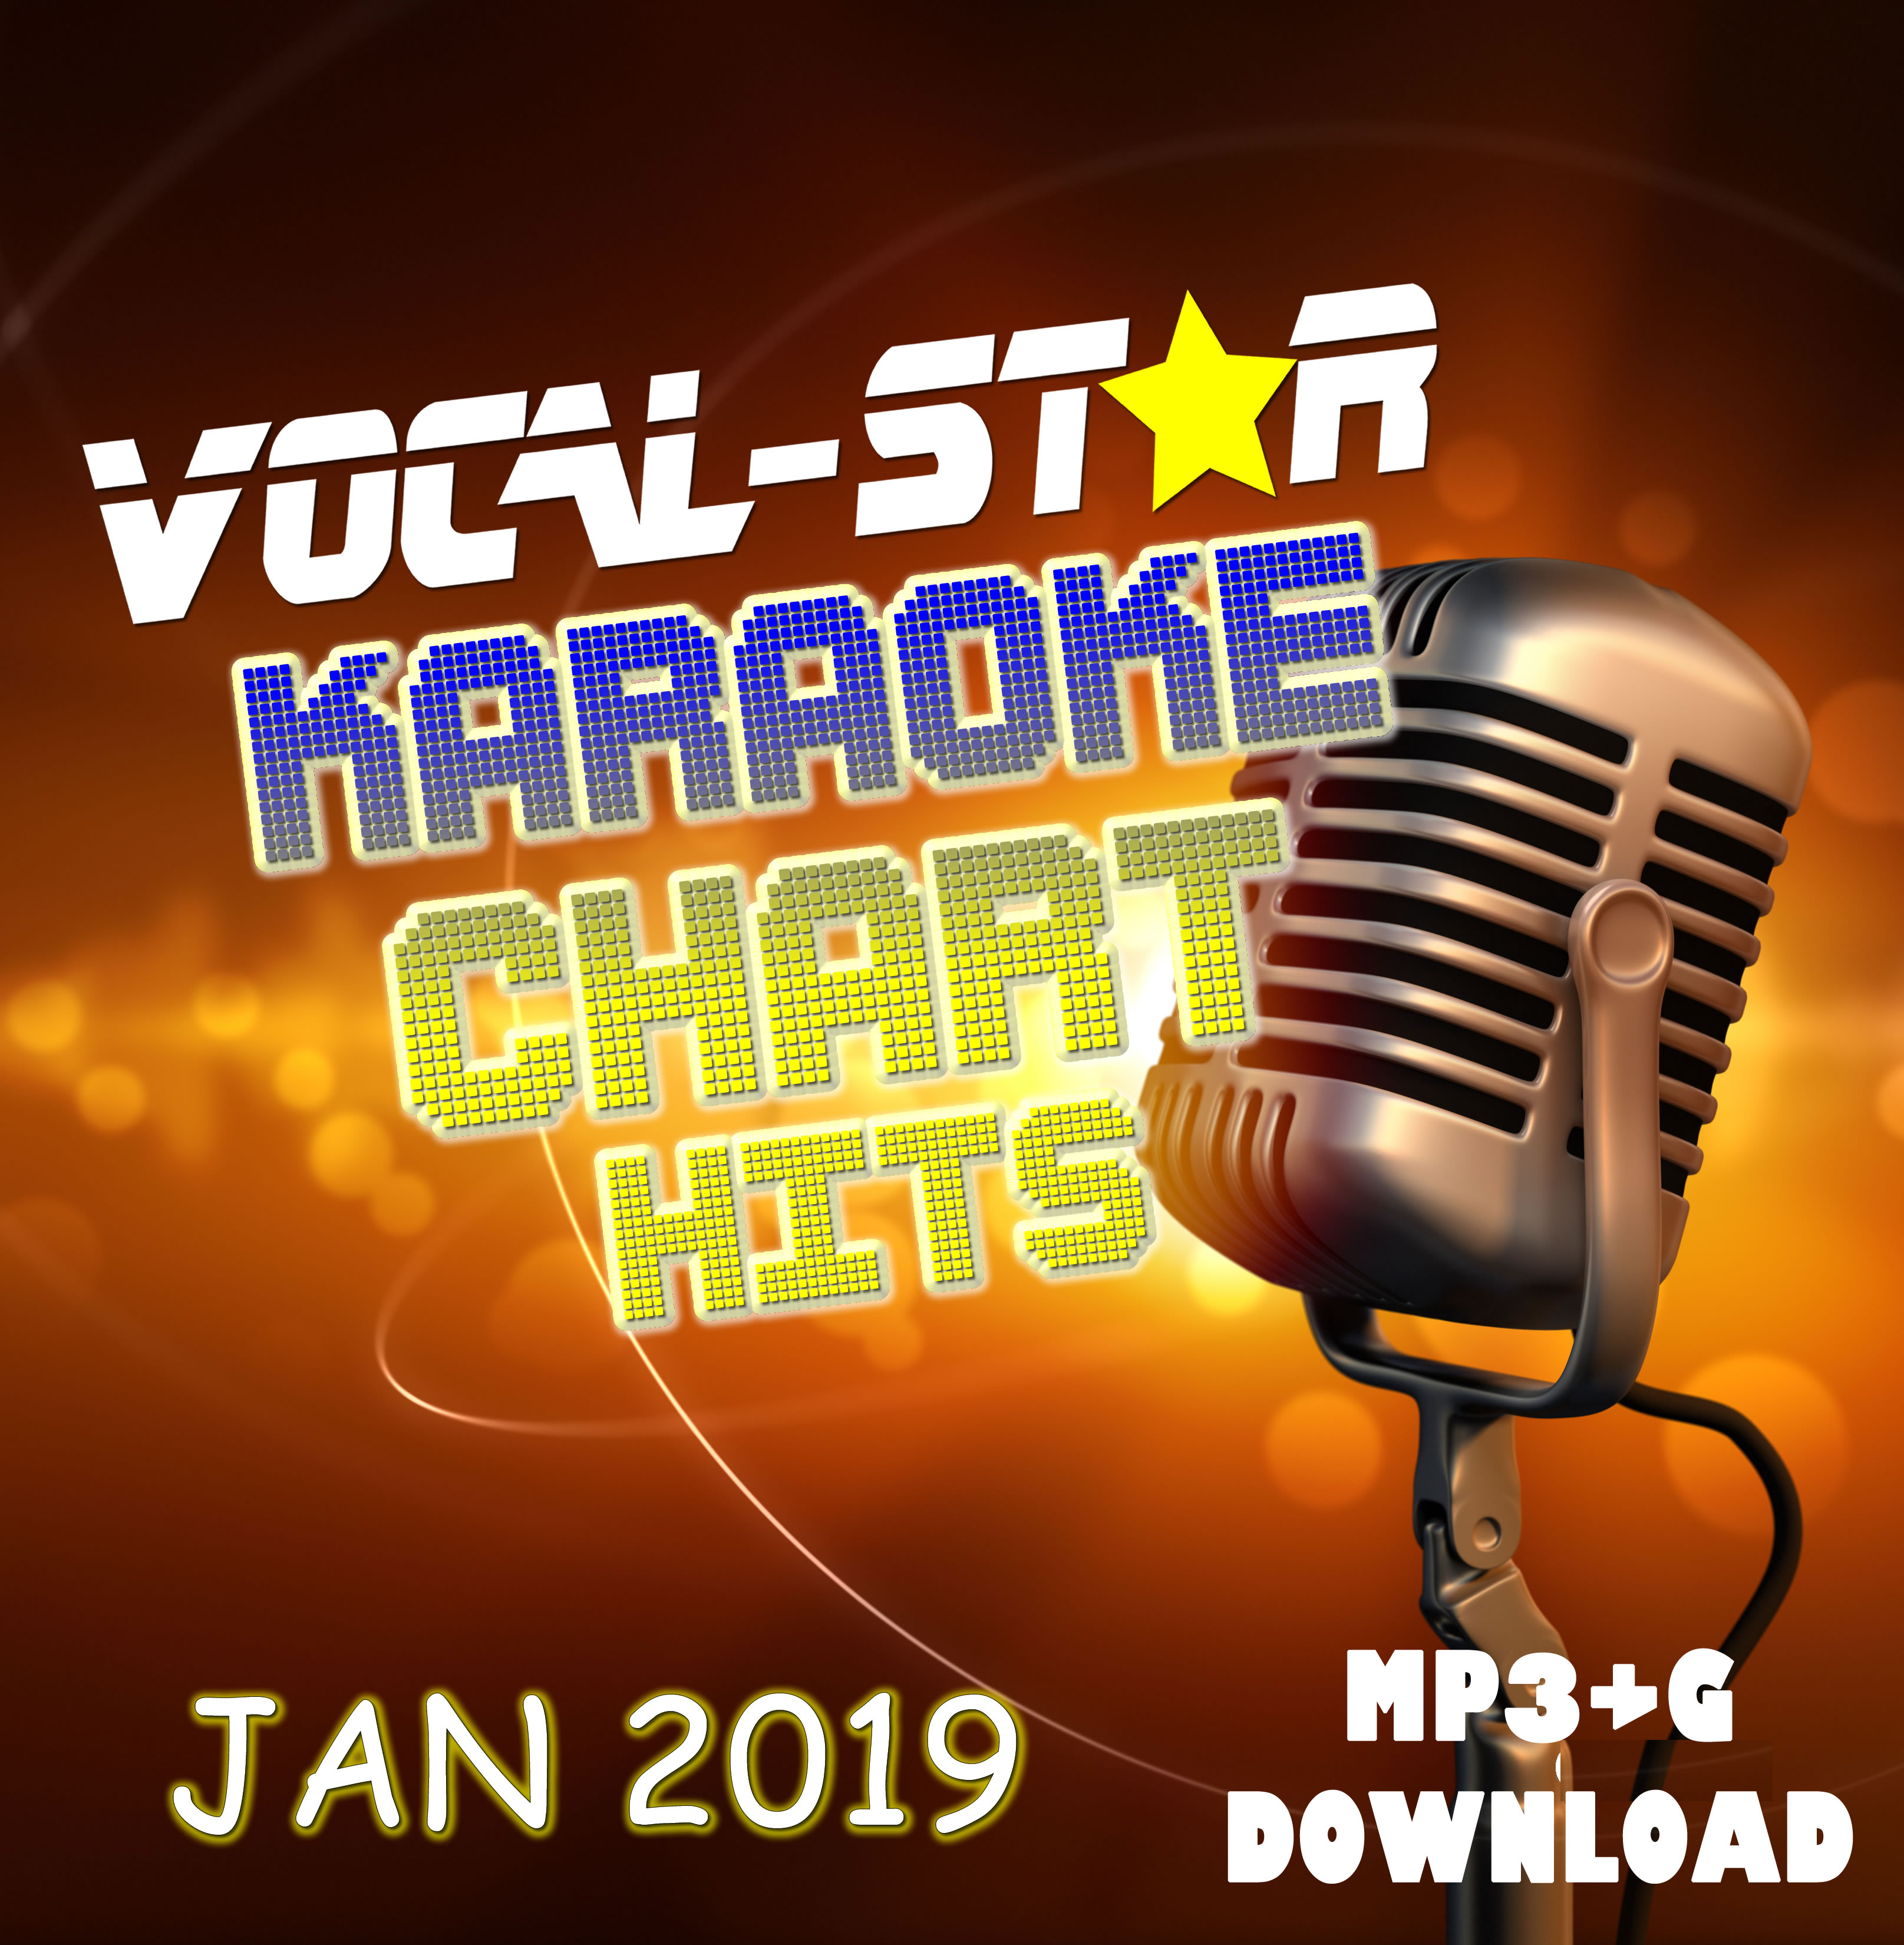 Vocal-Star January 2019 Hits Digital Download